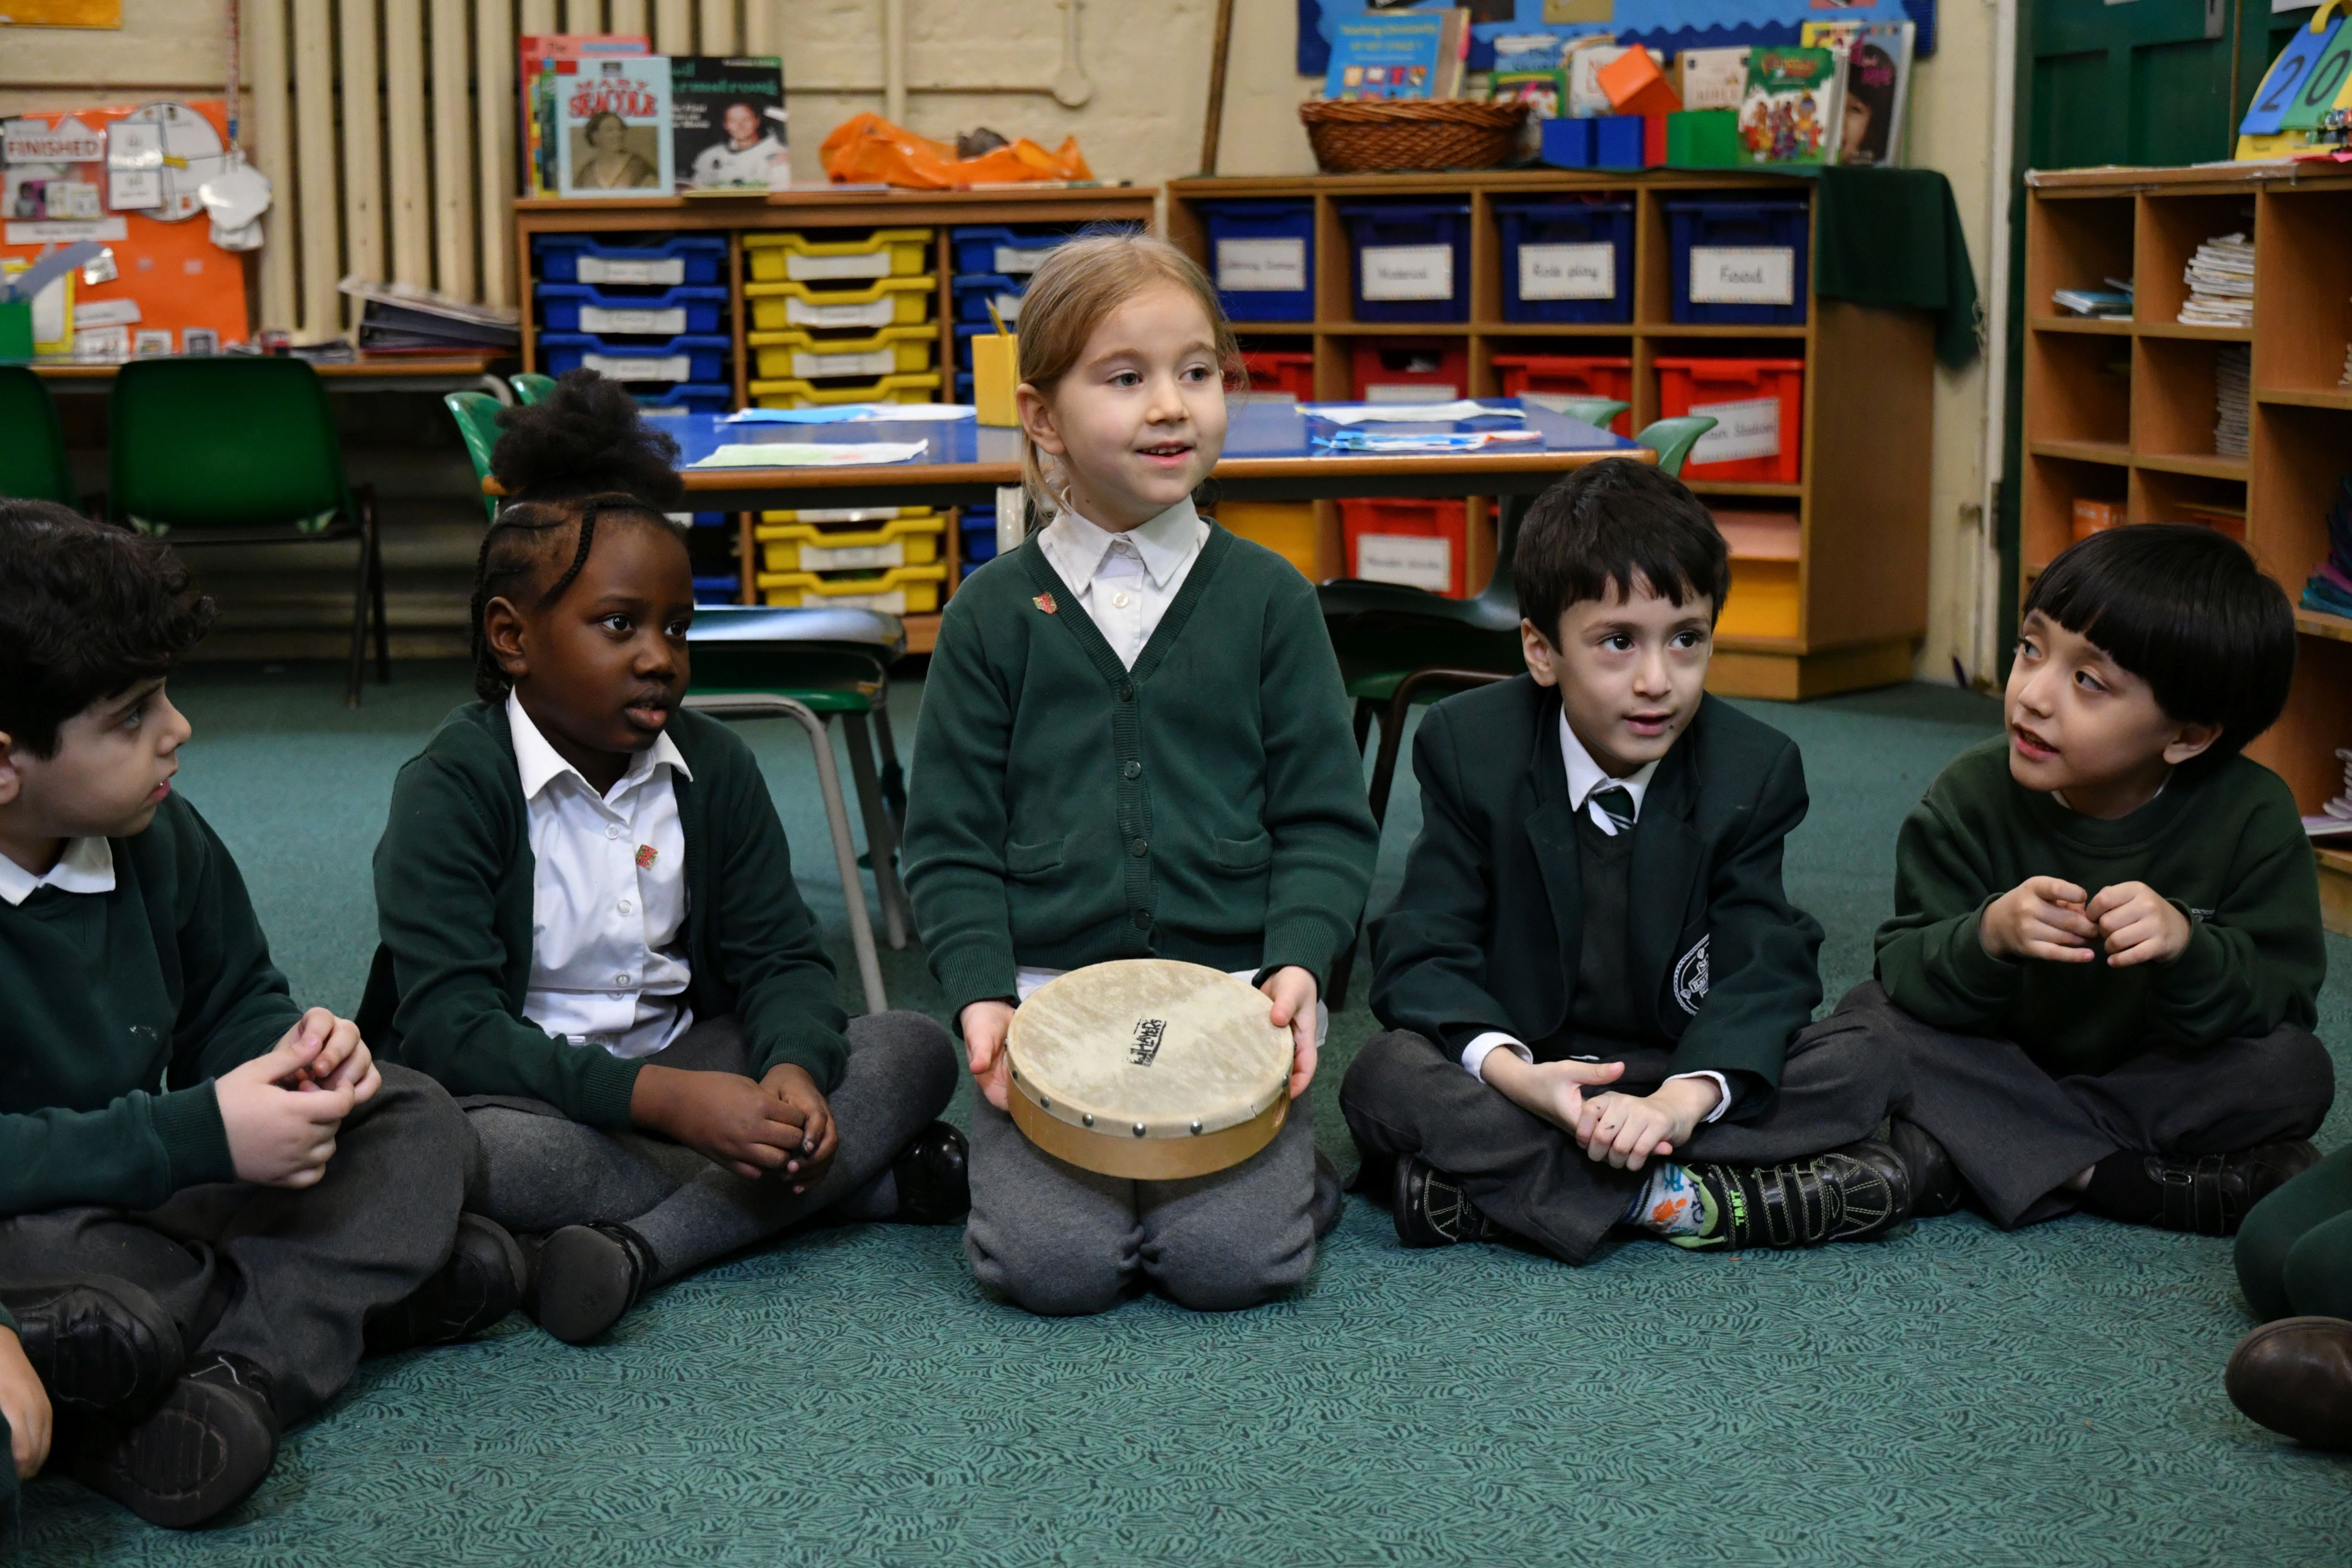 Activity photo: From ISM’s Primary Singing Toolkit, https://www.ismtrust.org/resources/primary-singing-toolkit